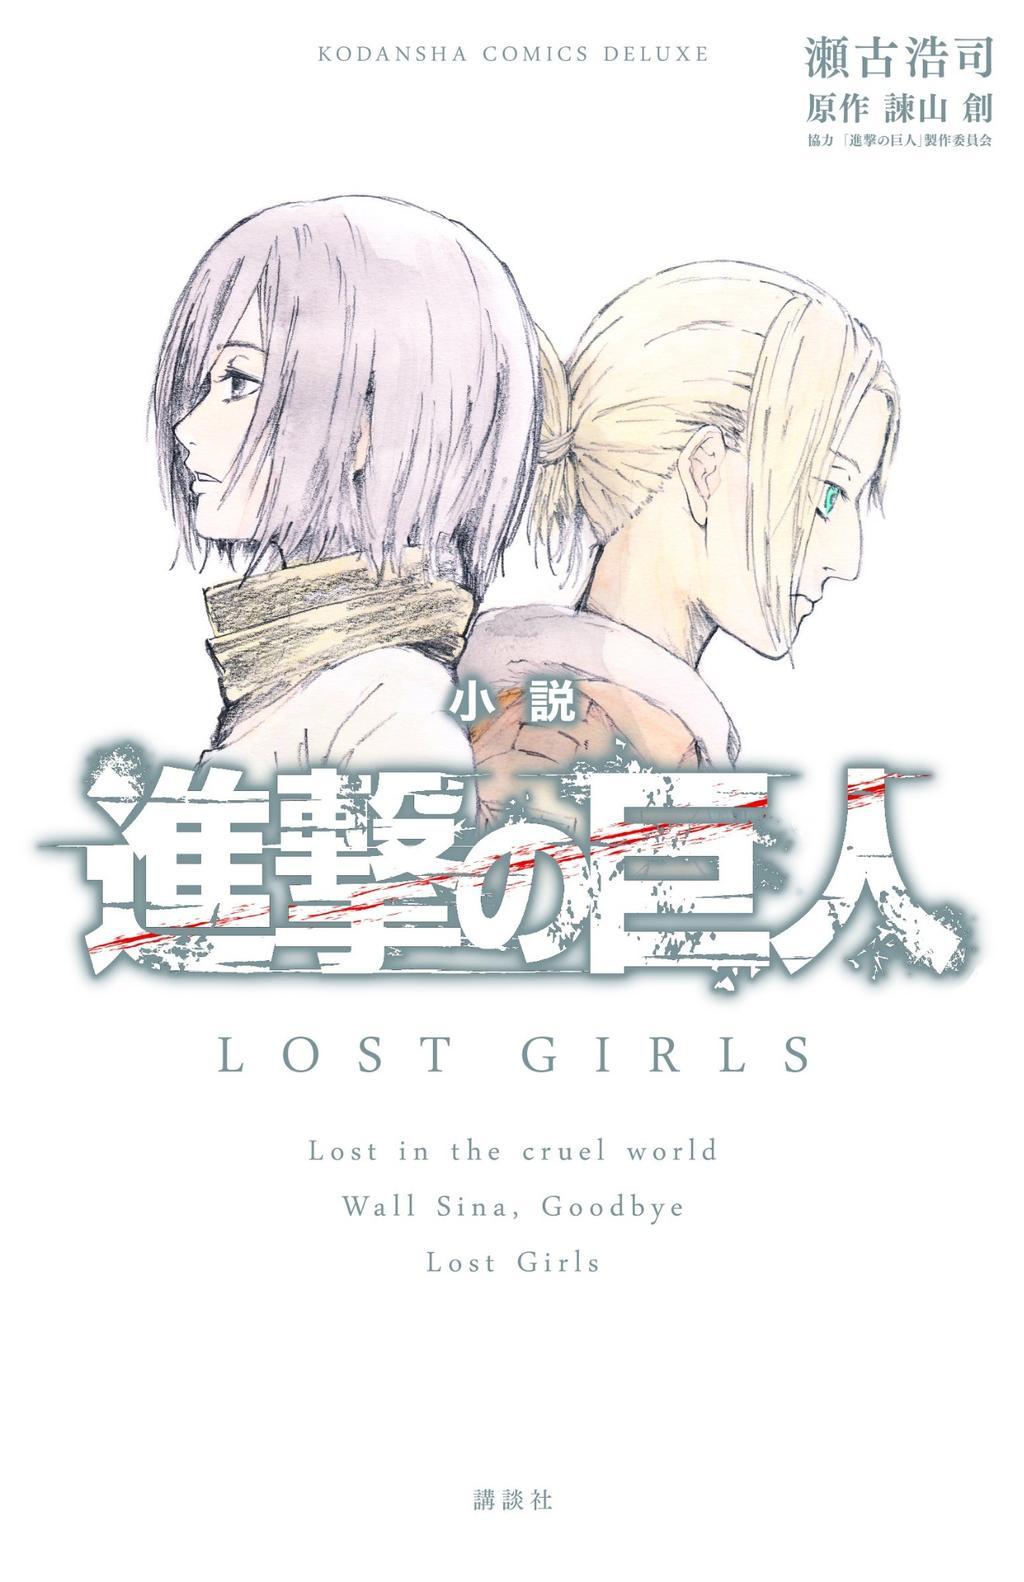  Kodansha releases the official cover for the &ldquo;Lost Girls&quot; novel,